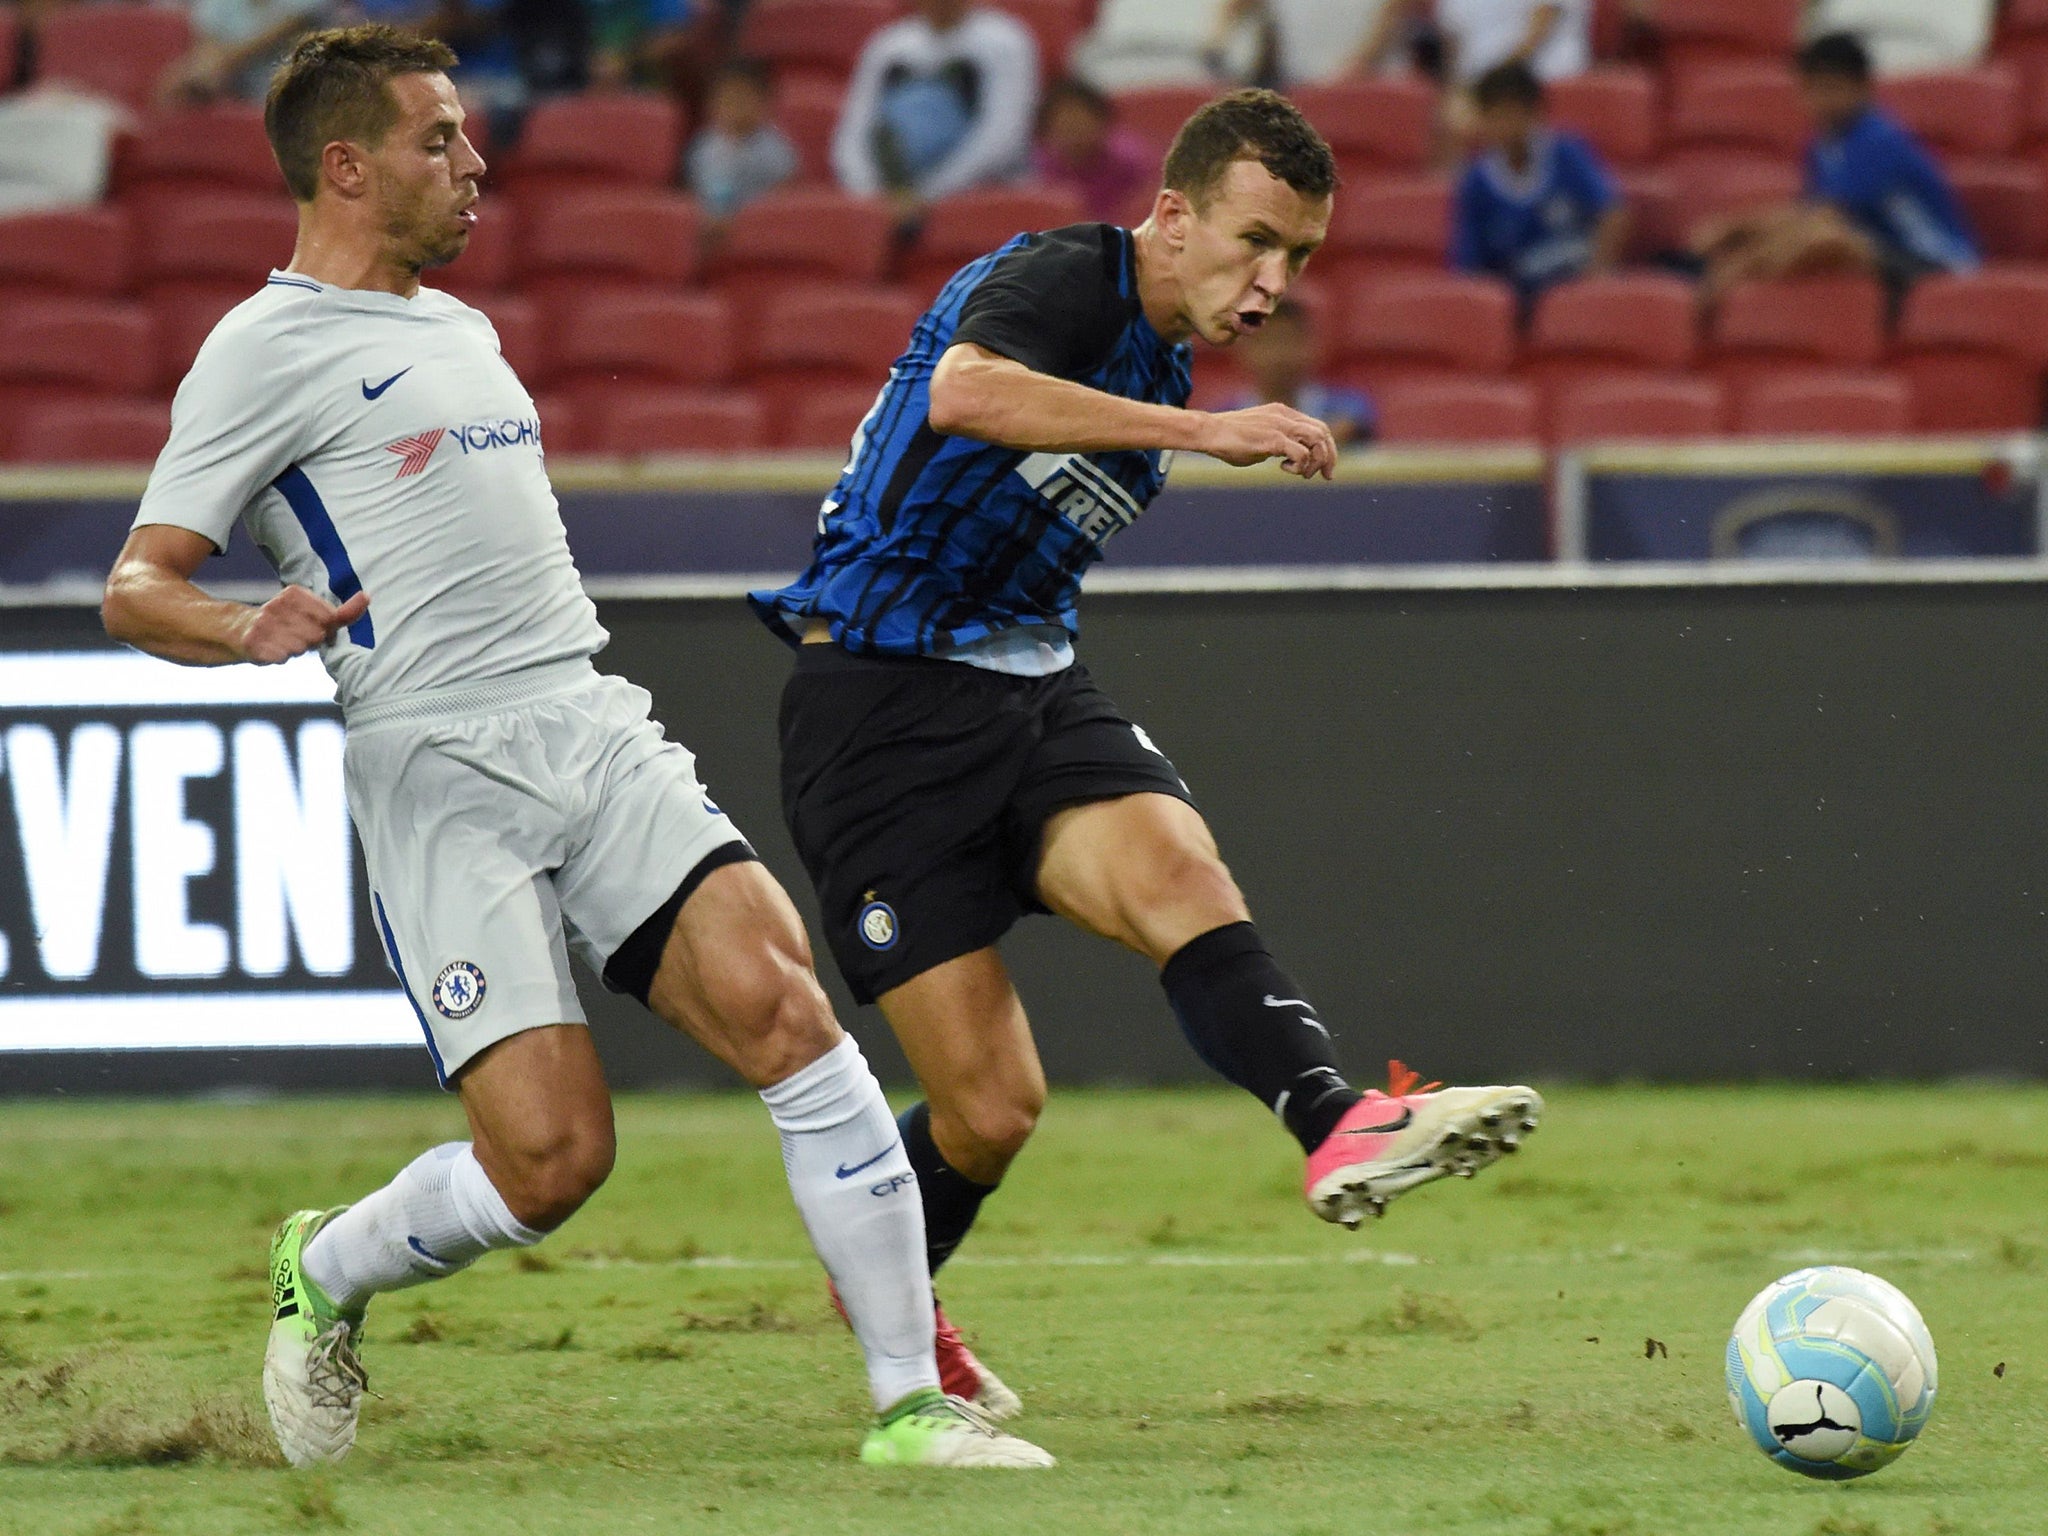 Ivan Perisic showed why he has attracted interest from the likes of Manchester United